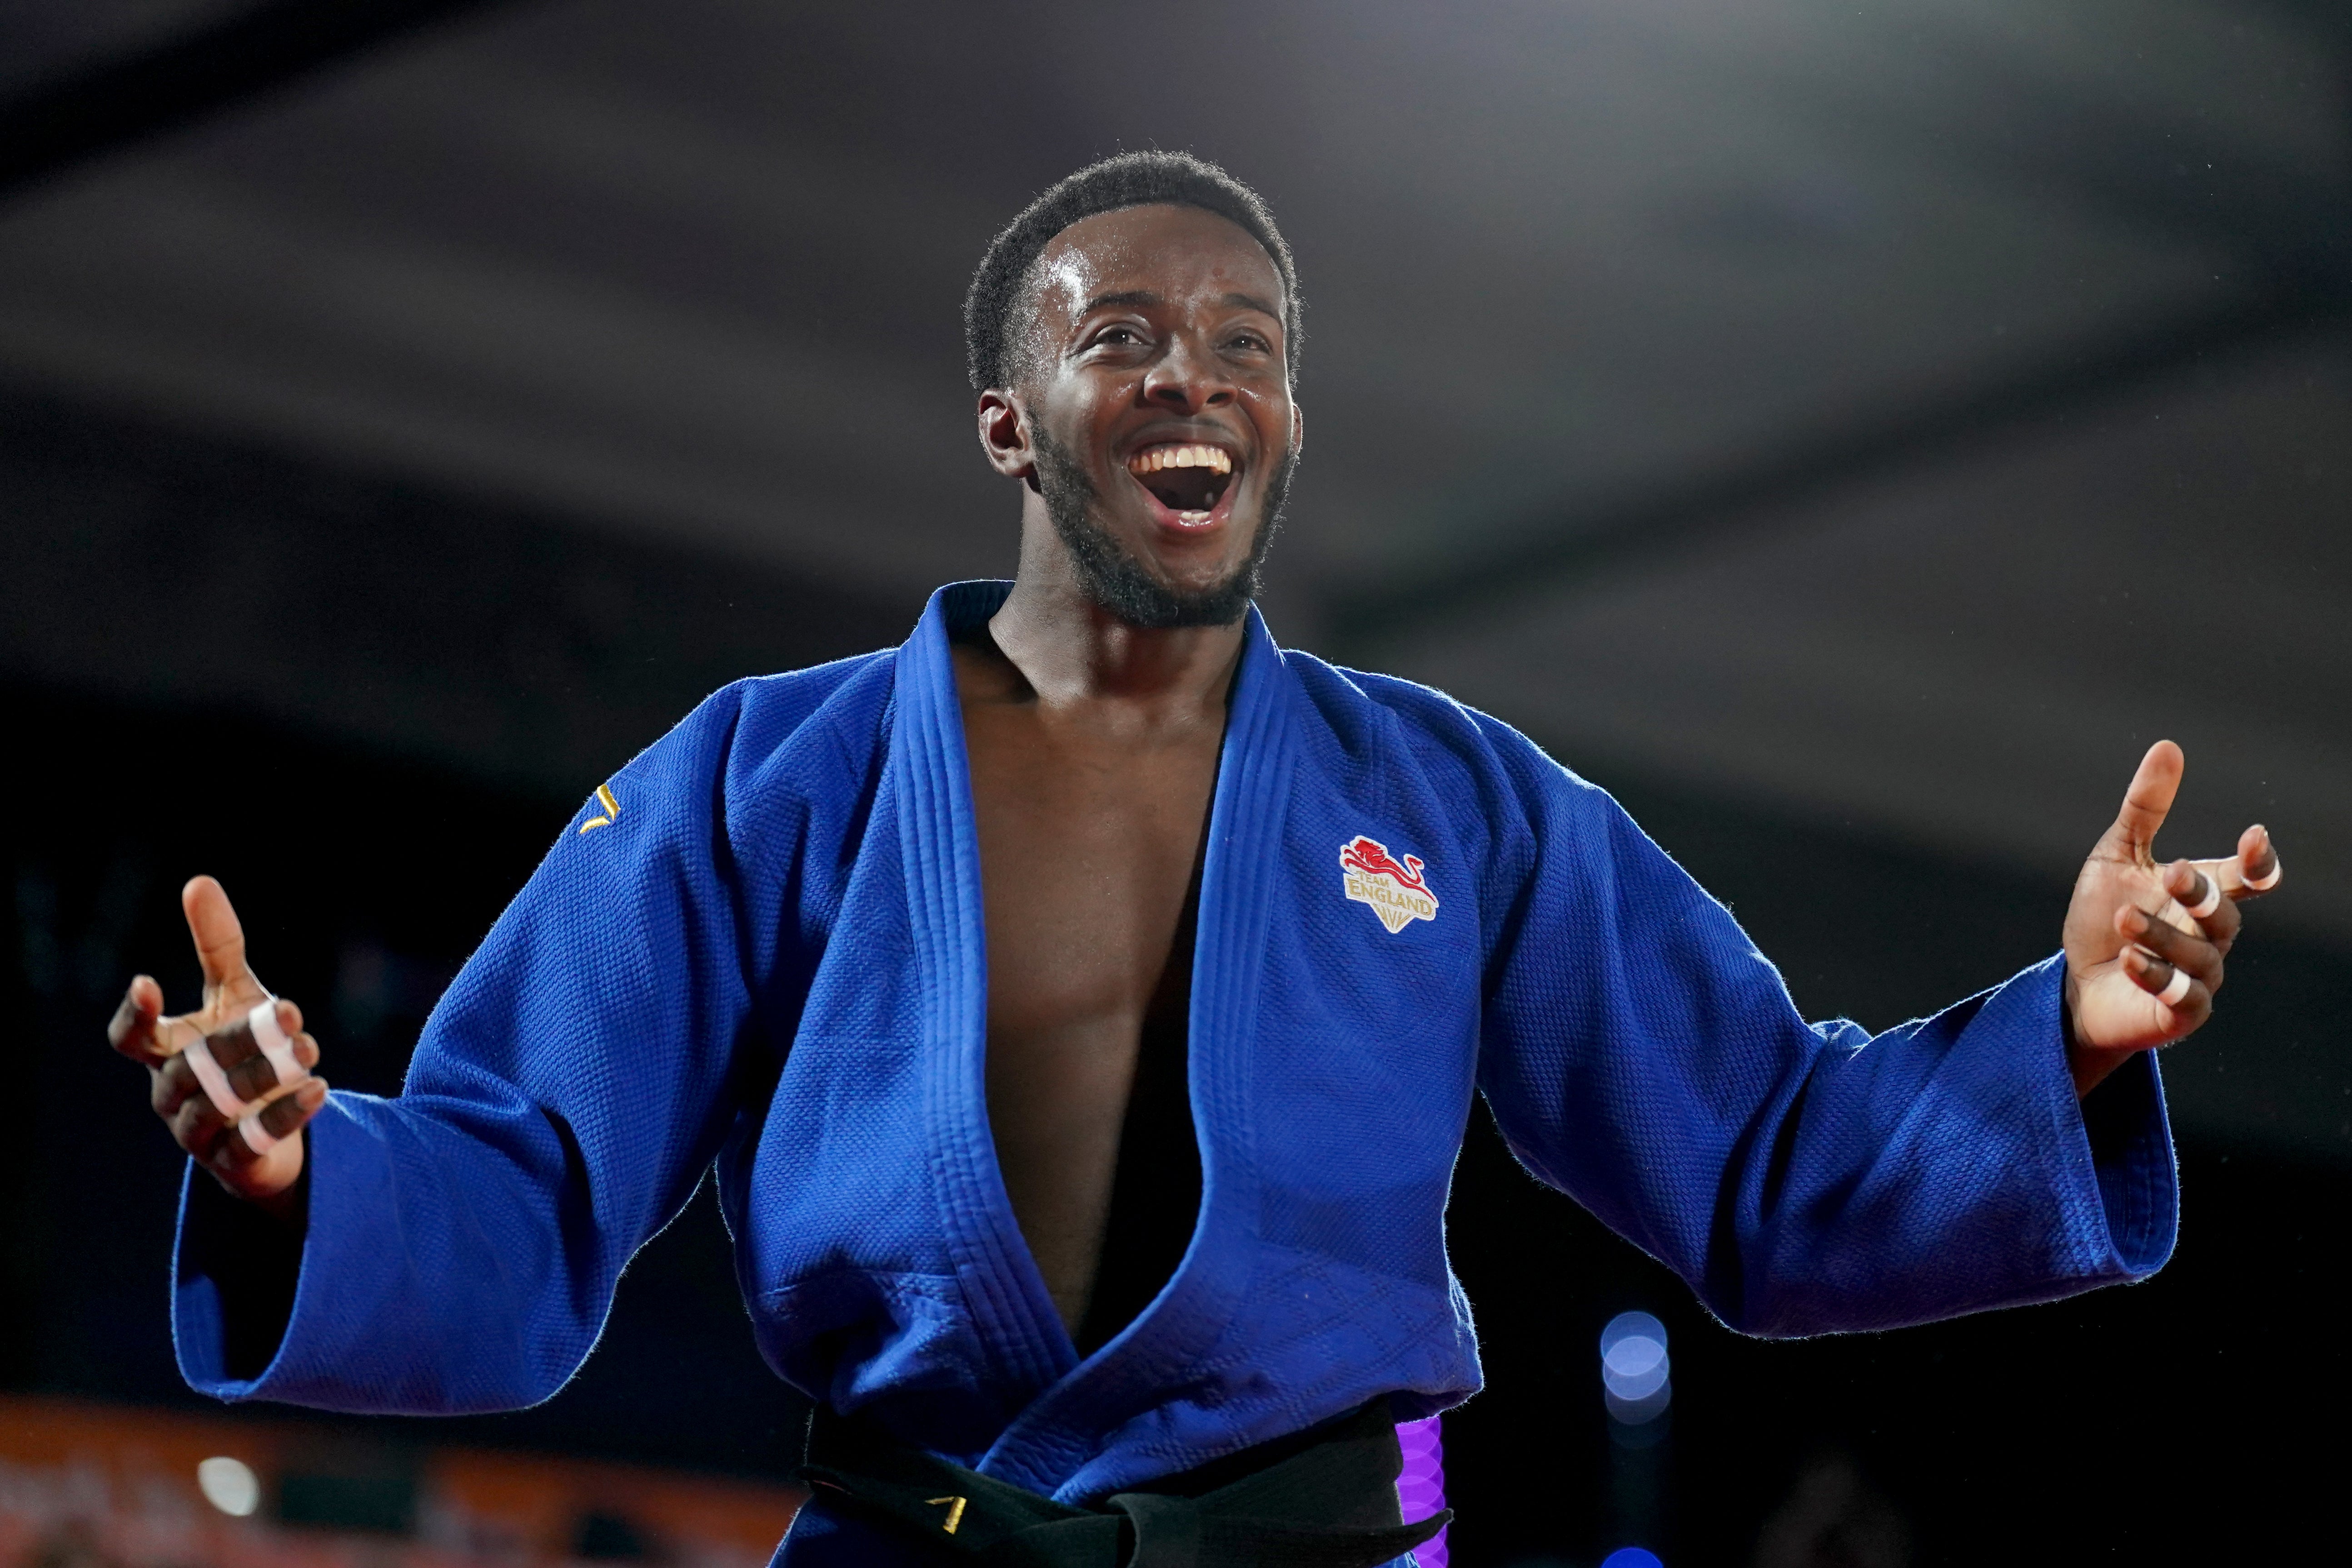 Jamal Petgrave celebrates after winning judo gold in the men’s -90kg division at the 2022 Commonwealth Games (Joe Giddens/PA)